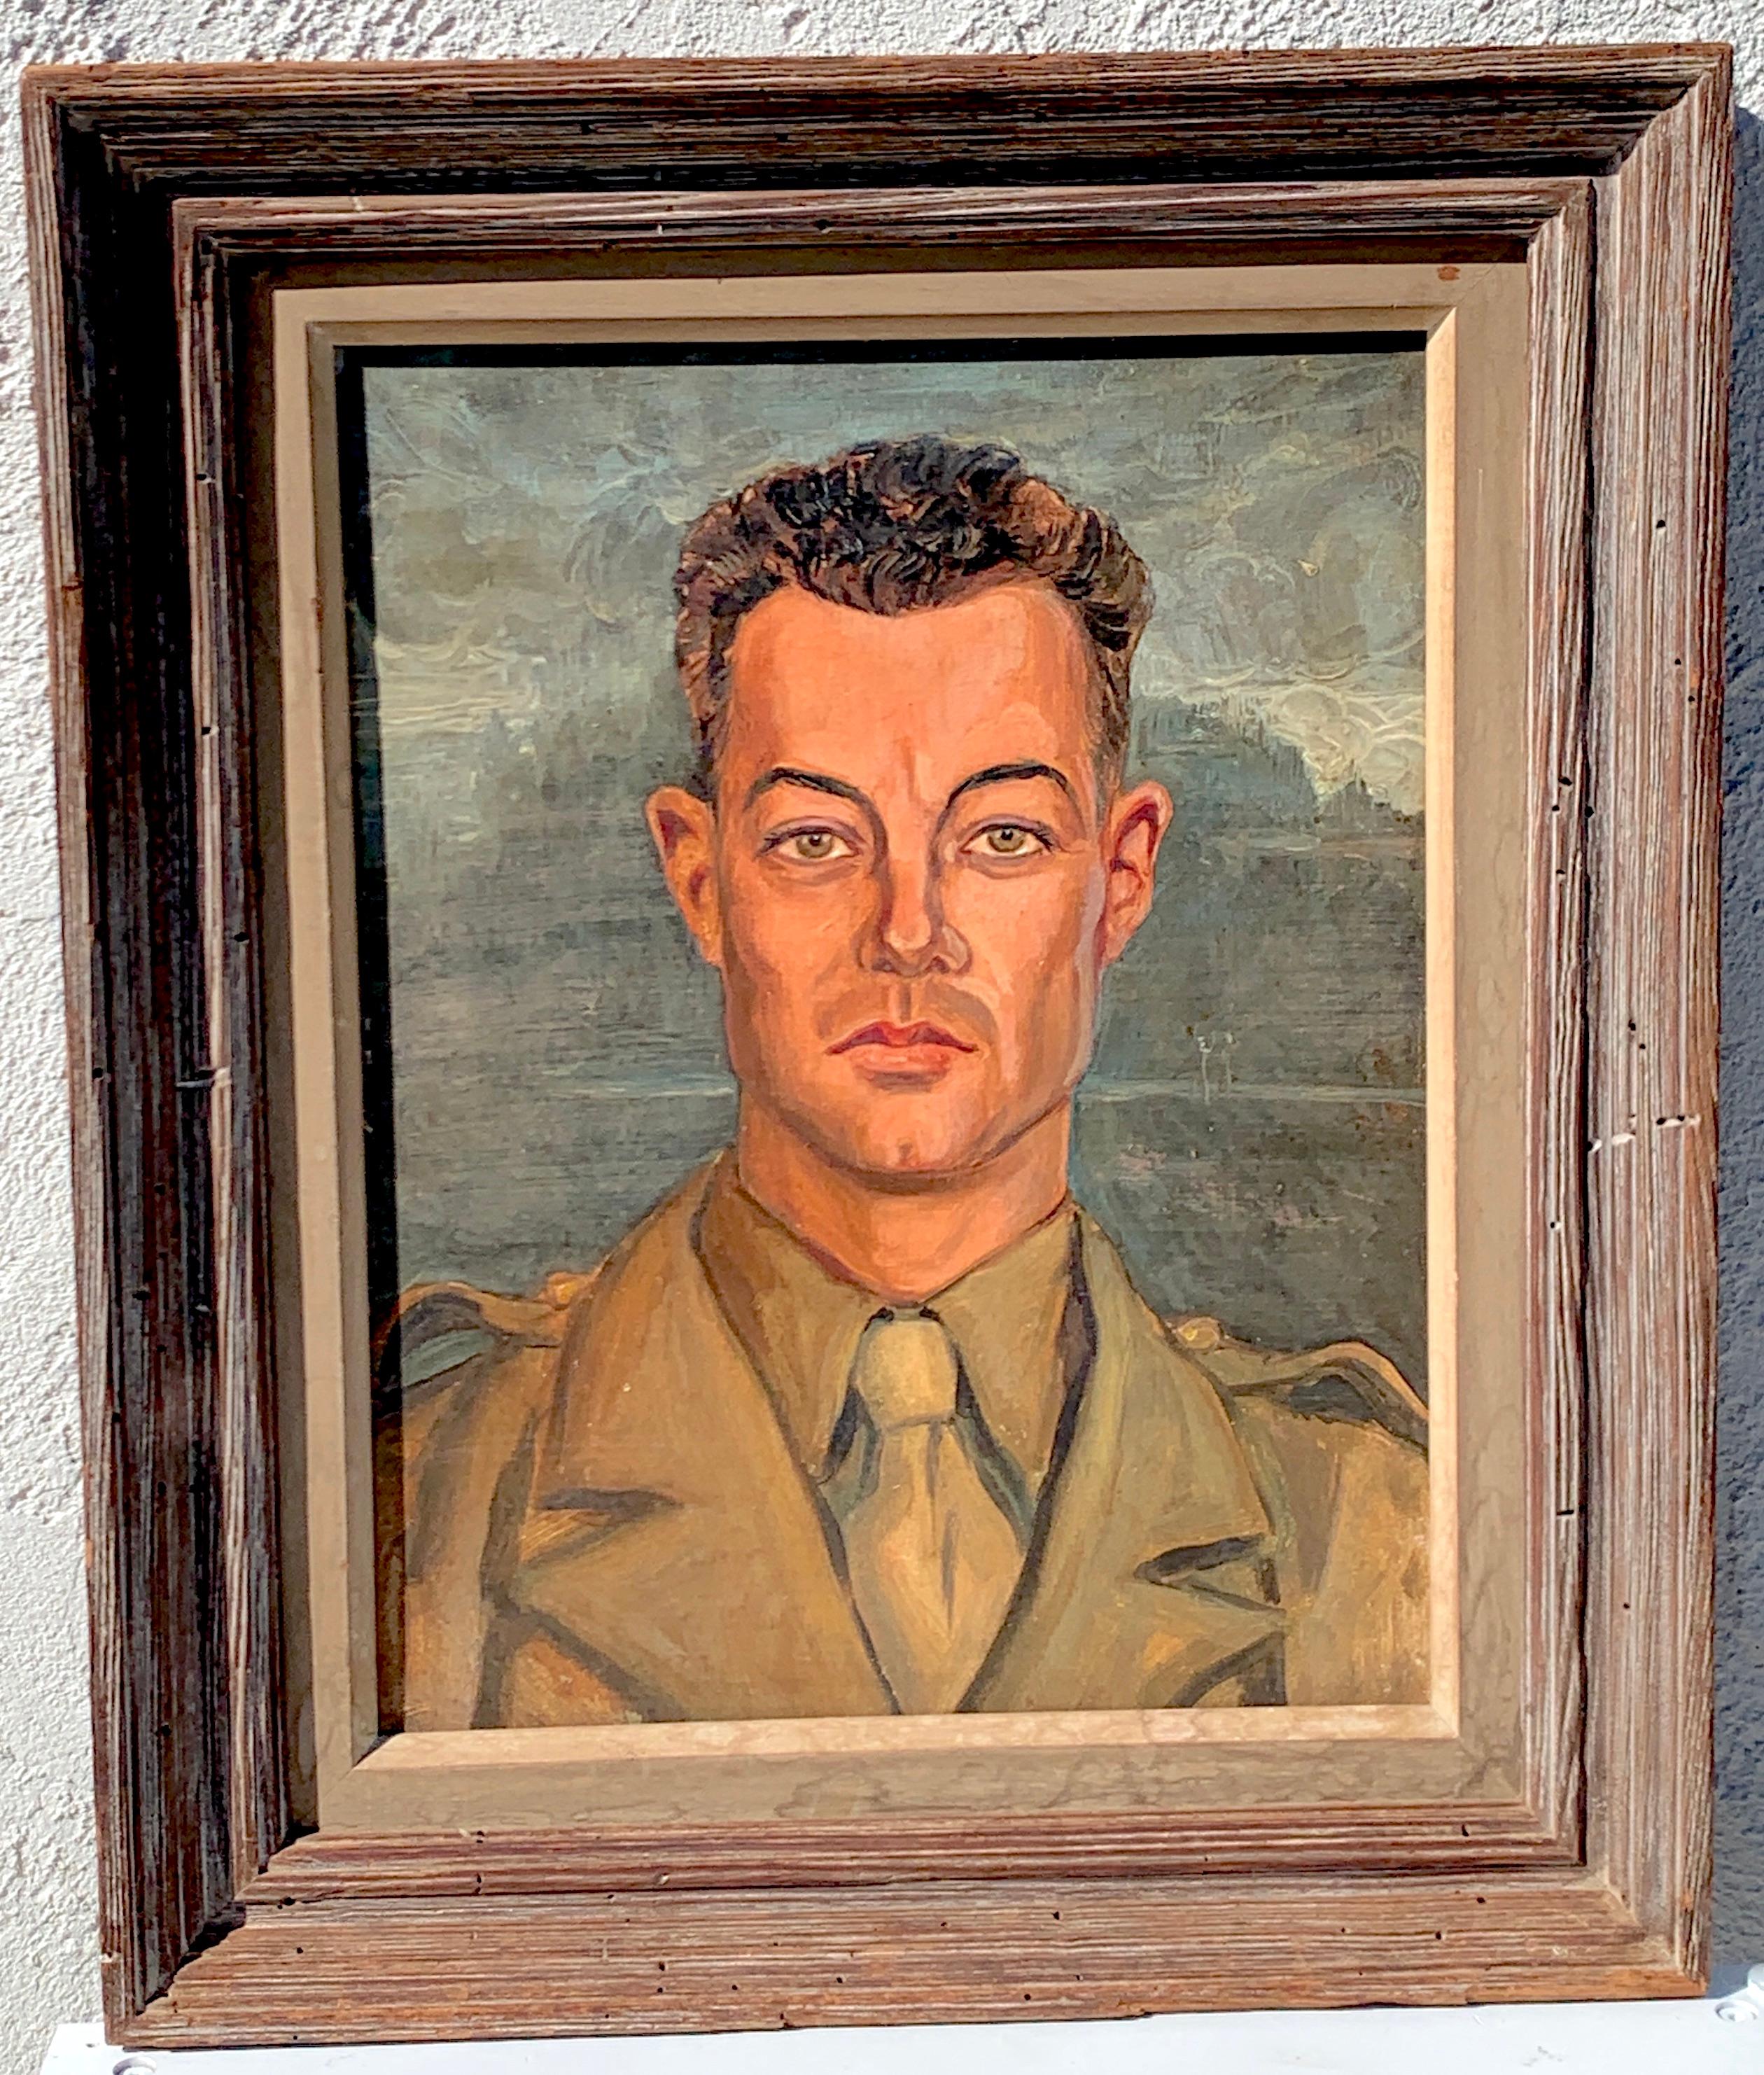 Handsome American Military WWII Portrait by Mildred Perman, 1935
Signed and dated on back 'Mildred Perman, October 18, 1935'
Oil on Canvas 14”x 18” 
Original Frame 19.5” x23.5”